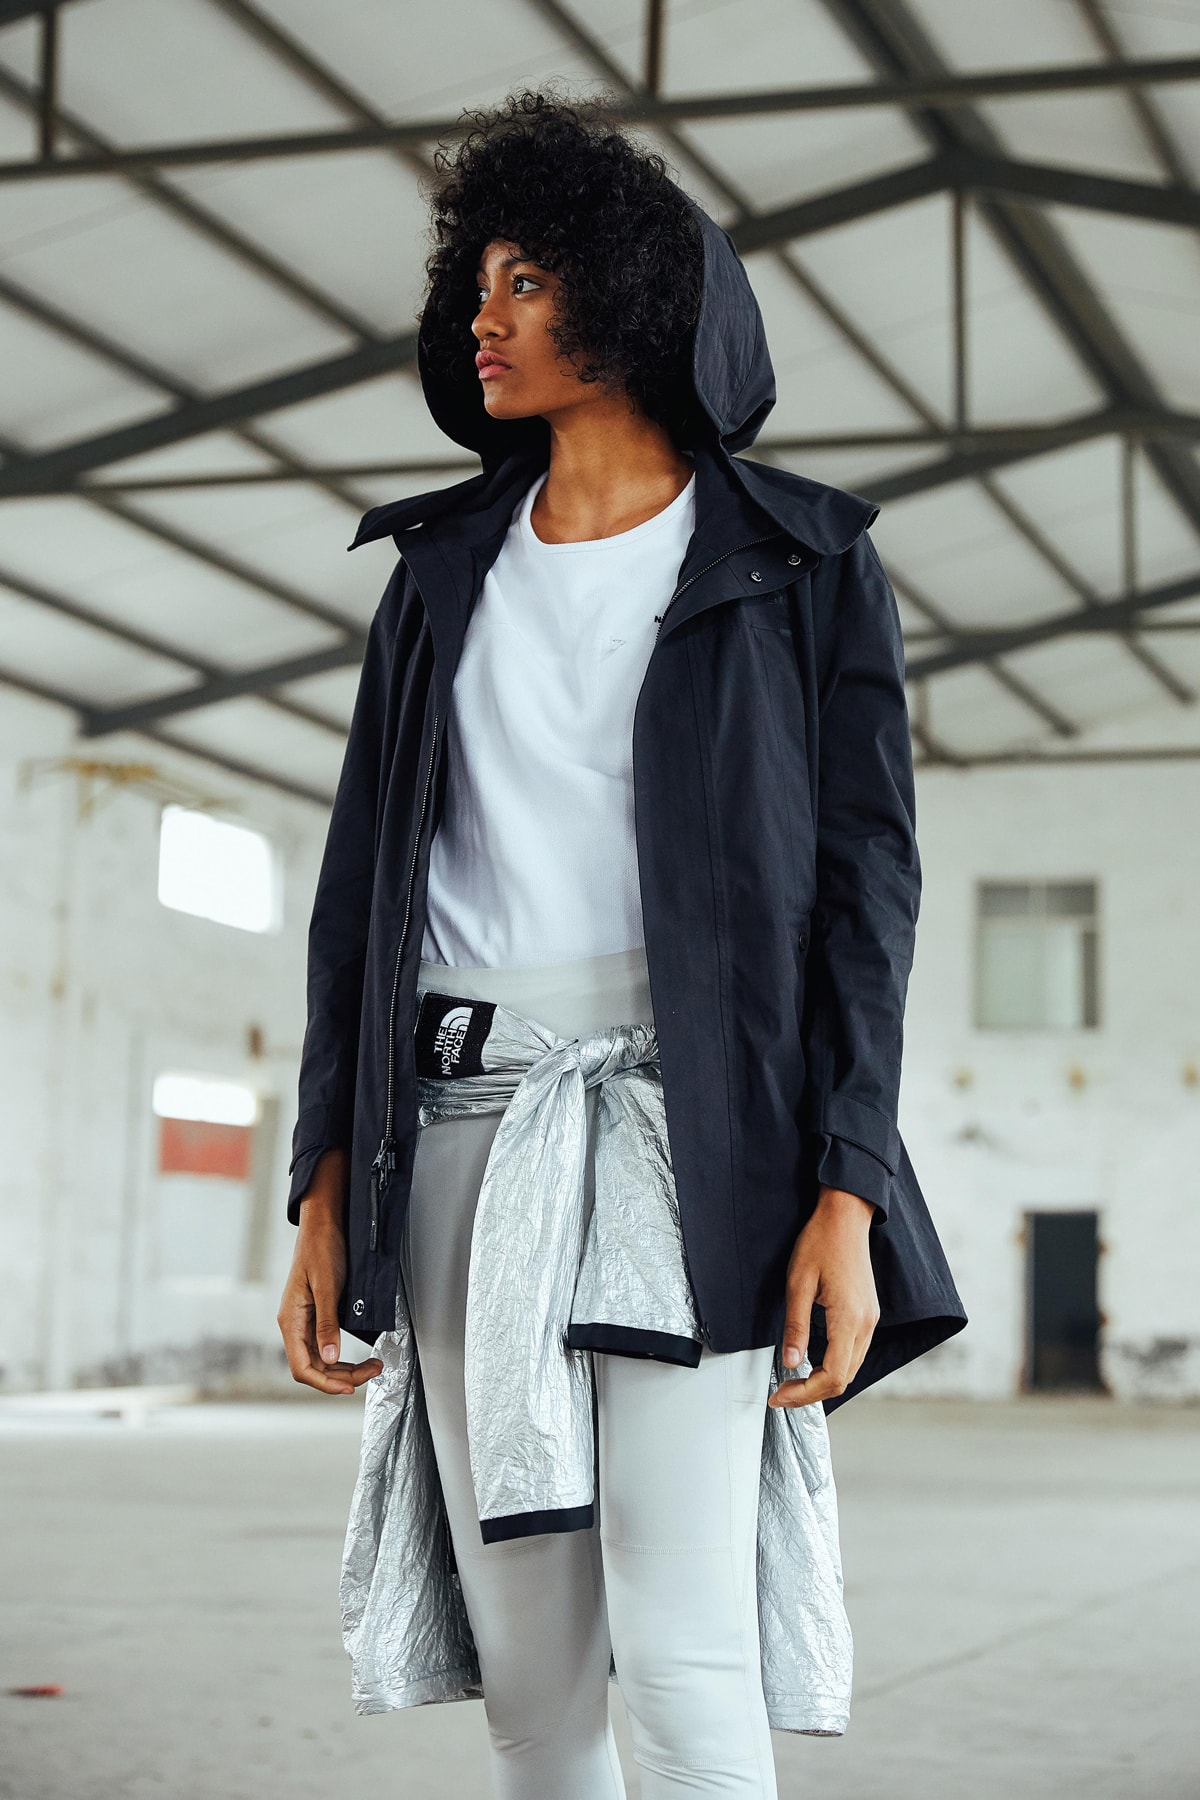 The North Face Urban Exploration Black Series Spring/Summer 2018 Collection Lookbook Jacket Black Silver